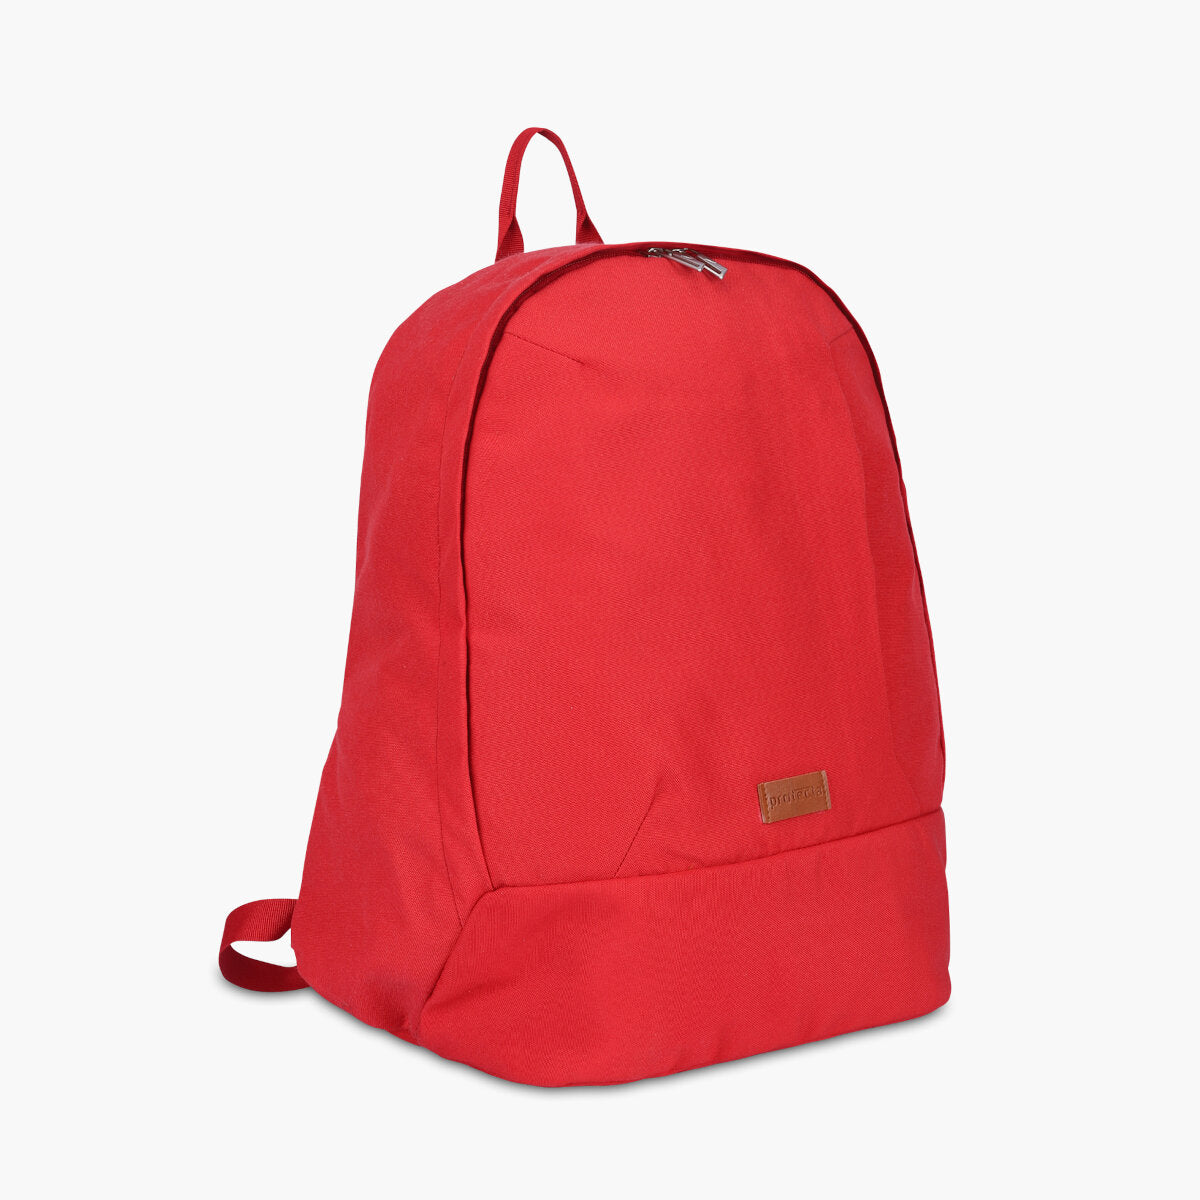 Red | Protecta Steady Progress Laptop Backpack - 4